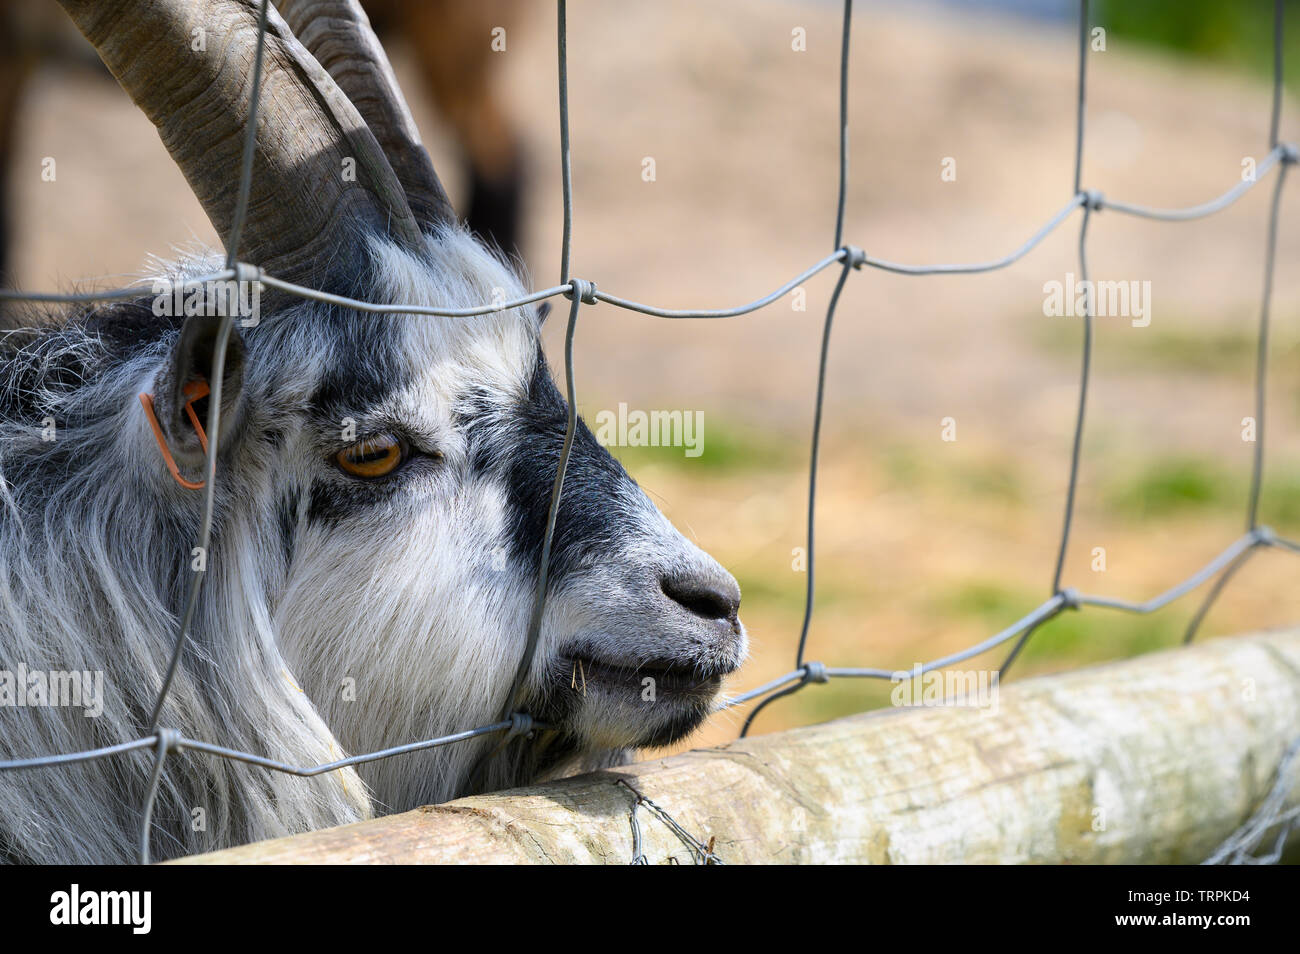 Caged goat looking for freedom from a farm Stock Photo